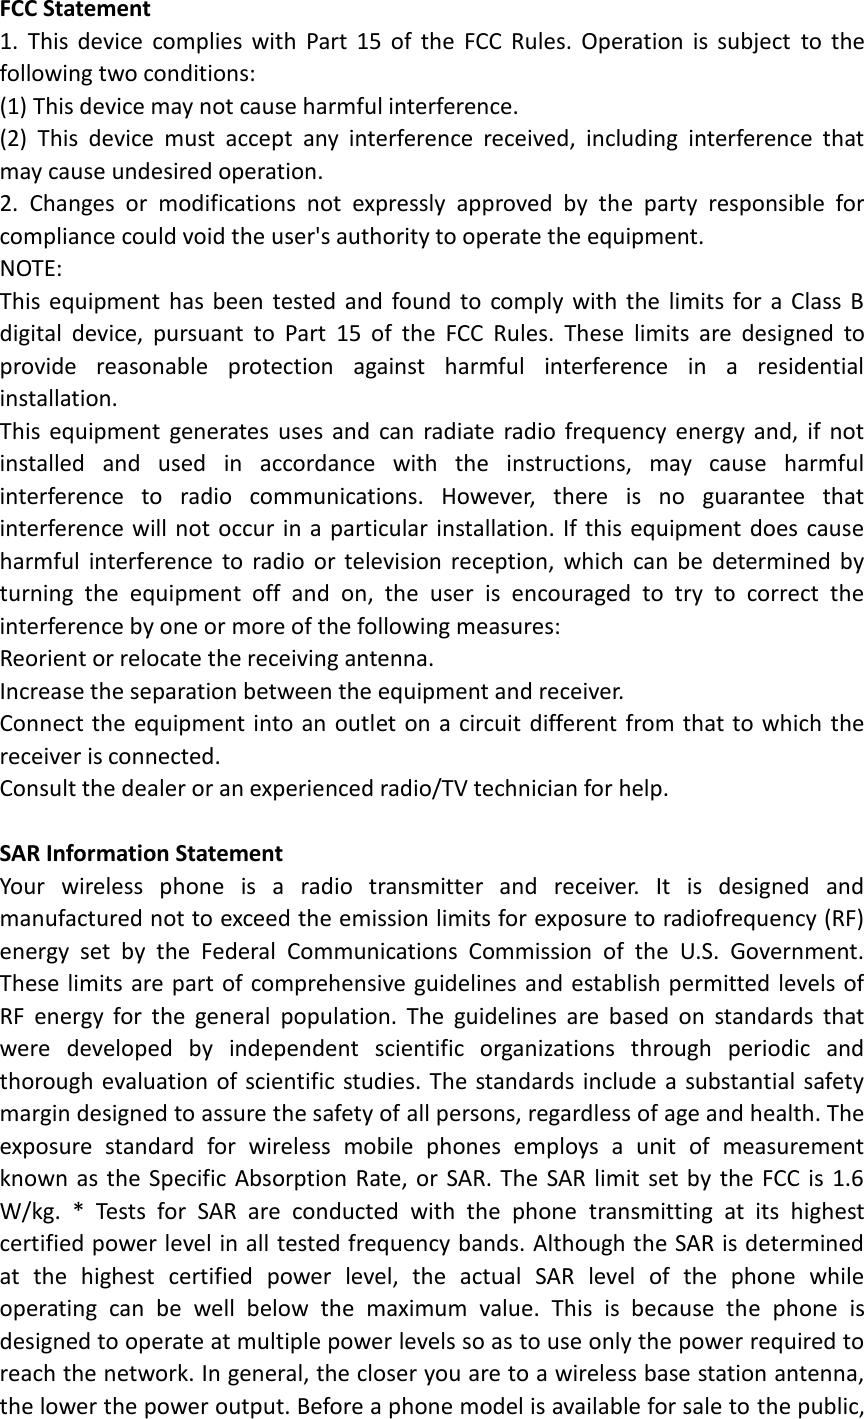 FCC Statement 1.  This  device  complies  with  Part  15  of  the  FCC  Rules.  Operation  is  subject  to  the following two conditions: (1) This device may not cause harmful interference. (2)  This  device  must  accept  any  interference  received,  including  interference  that may cause undesired operation. 2.  Changes  or  modifications  not  expressly  approved  by  the  party  responsible  for compliance could void the user&apos;s authority to operate the equipment. NOTE:   This  equipment has  been tested  and  found to comply with  the  limits for a  Class B digital  device,  pursuant  to  Part  15  of  the  FCC  Rules.  These  limits  are  designed  to provide  reasonable  protection  against  harmful  interference  in  a  residential installation. This  equipment  generates  uses and  can radiate  radio frequency energy  and,  if  not installed  and  used  in  accordance  with  the  instructions,  may  cause  harmful interference  to  radio  communications.  However,  there  is  no  guarantee  that interference will not occur in a particular installation. If this equipment does cause harmful  interference  to  radio  or  television  reception,  which  can  be  determined  by turning  the  equipment  off  and  on,  the  user  is  encouraged  to  try  to  correct  the interference by one or more of the following measures: Reorient or relocate the receiving antenna. Increase the separation between the equipment and receiver. Connect the equipment into an outlet on a circuit different from that to which the receiver is connected.   Consult the dealer or an experienced radio/TV technician for help.  SAR Information Statement Your  wireless  phone  is  a  radio  transmitter  and  receiver.  It  is  designed  and manufactured not to exceed the emission limits for exposure to radiofrequency (RF) energy  set  by  the  Federal  Communications  Commission  of  the  U.S.  Government. These limits are part of comprehensive guidelines and establish permitted levels of RF  energy  for  the  general  population.  The  guidelines  are  based  on  standards  that were  developed  by  independent  scientific  organizations  through  periodic  and thorough evaluation of scientific studies. The standards include a  substantial safety margin designed to assure the safety of all persons, regardless of age and health. The exposure  standard  for  wireless  mobile  phones  employs  a  unit  of  measurement known as the Specific Absorption Rate, or  SAR. The  SAR limit set by  the FCC is  1.6 W/kg.  *  Tests  for  SAR  are  conducted  with  the  phone  transmitting  at  its  highest certified power level in all tested frequency bands. Although the SAR is determined at  the  highest  certified  power  level,  the  actual  SAR  level  of  the  phone  while operating  can  be  well  below  the  maximum  value.  This  is  because  the  phone  is designed to operate at multiple power levels so as to use only the power required to reach the network. In general, the closer you are to a wireless base station antenna, the lower the power output. Before a phone model is available for sale to the public, 